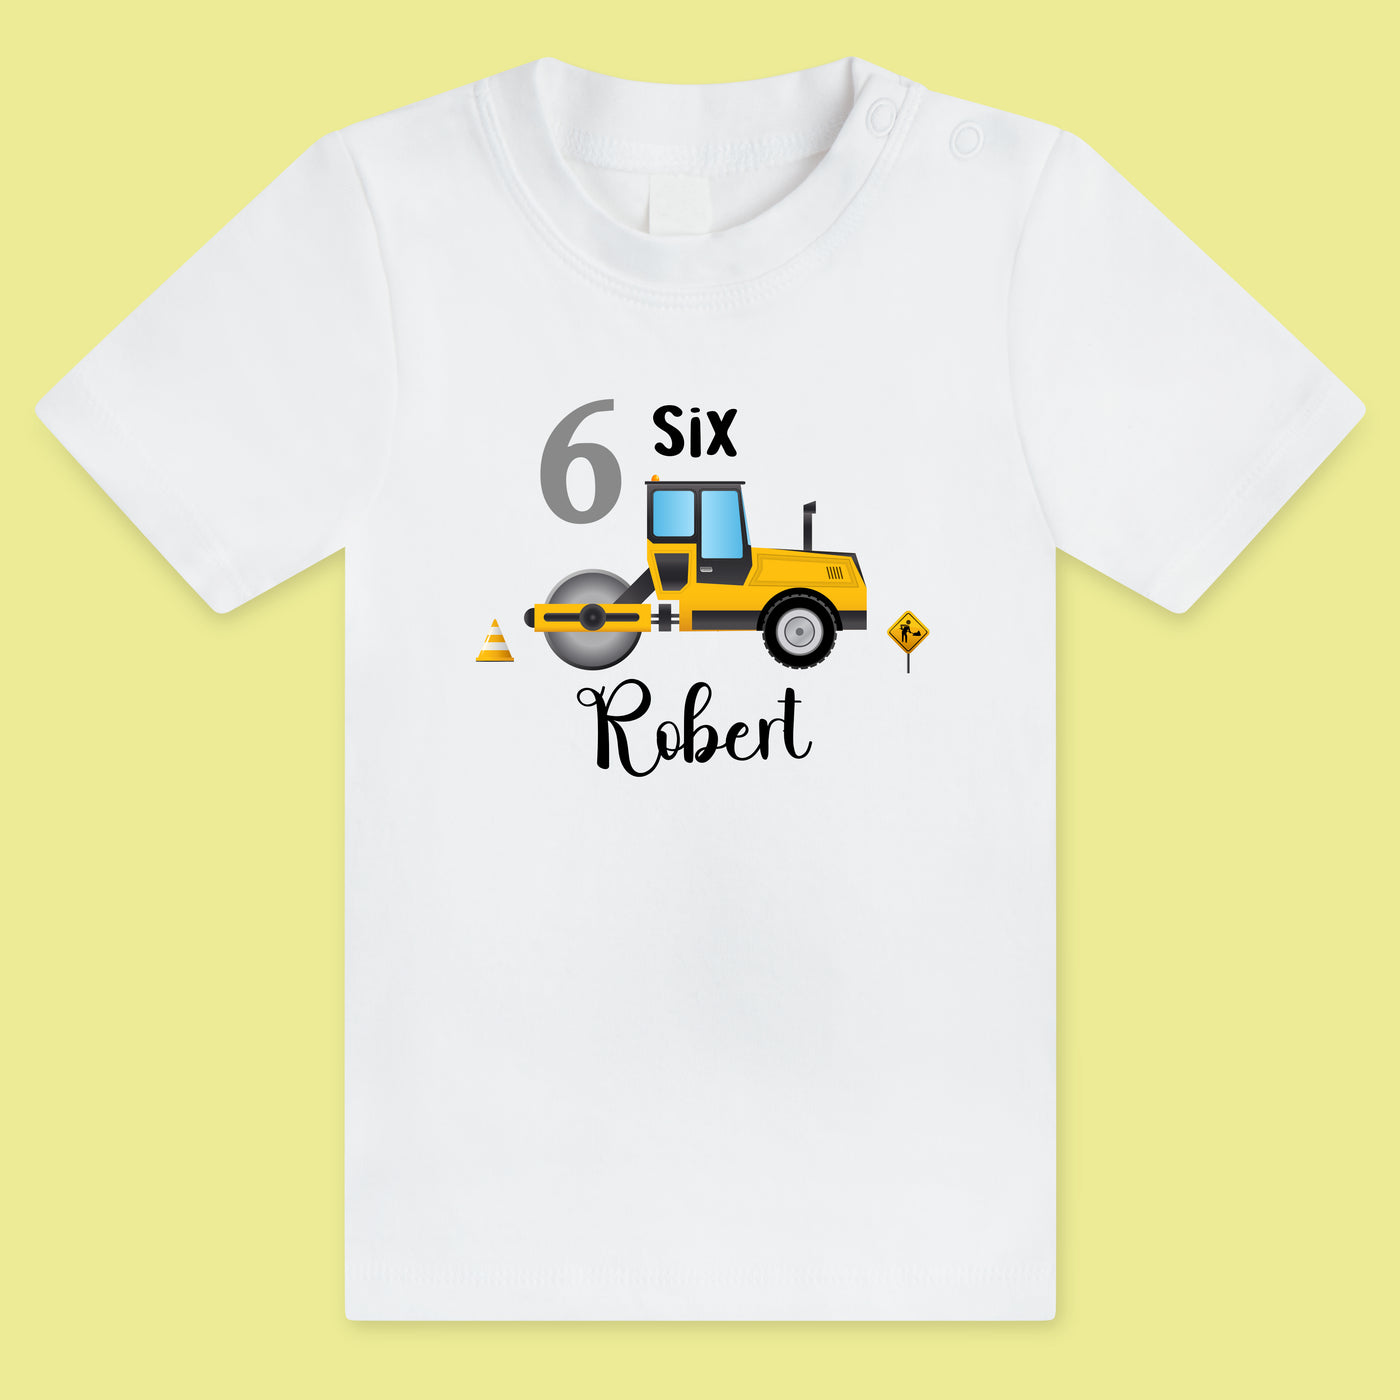 KID'S BIRTHDAY DIGIT T-SHIRT WITH VEHICLE STYLE 6